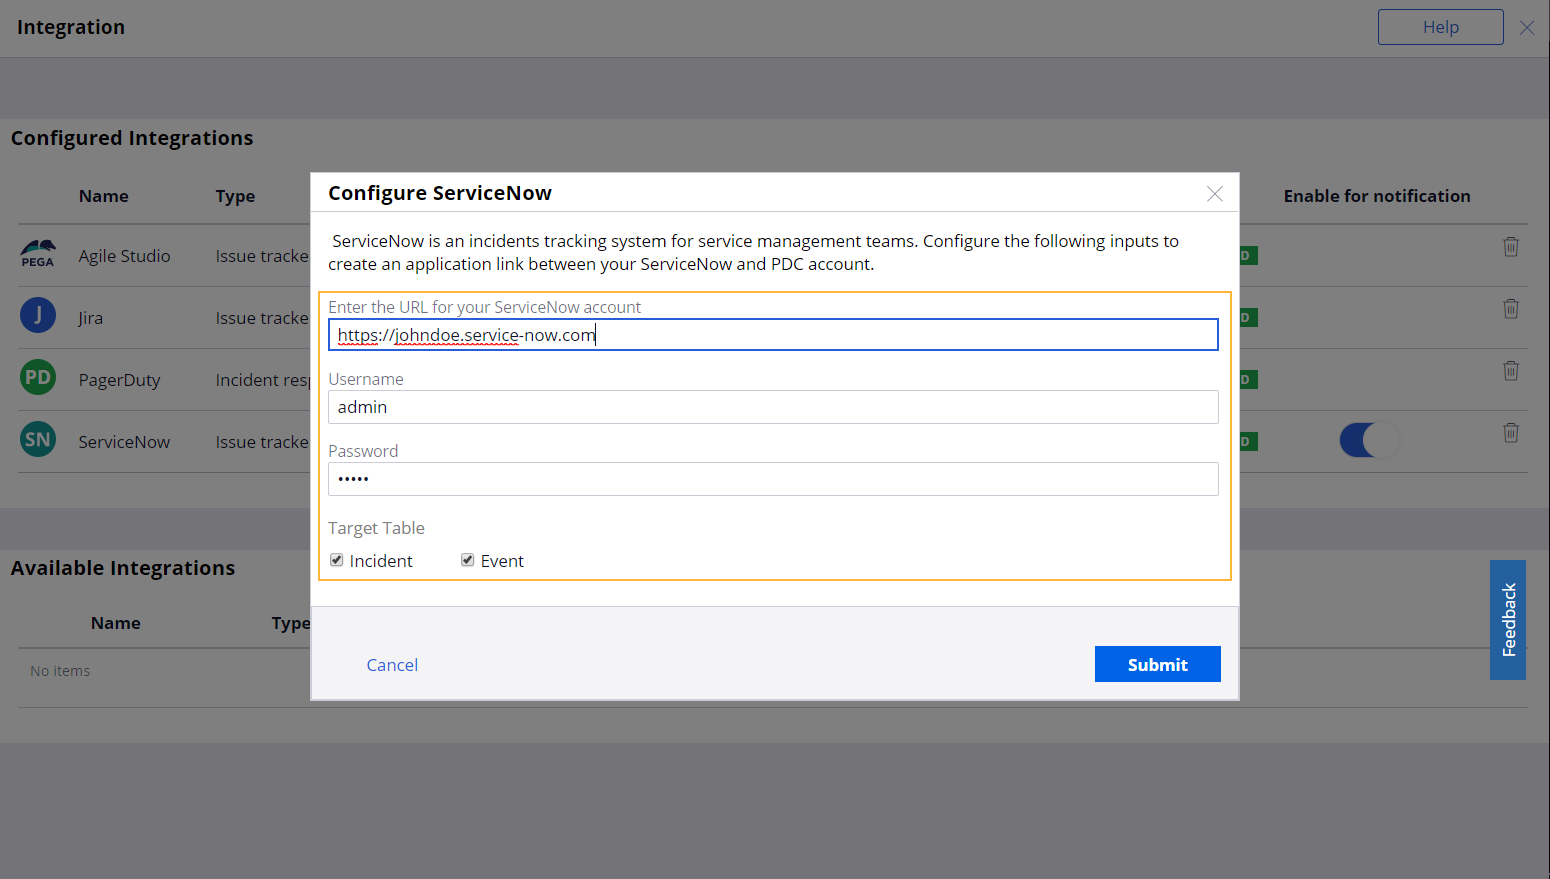 Configurations for ServiceNow integration